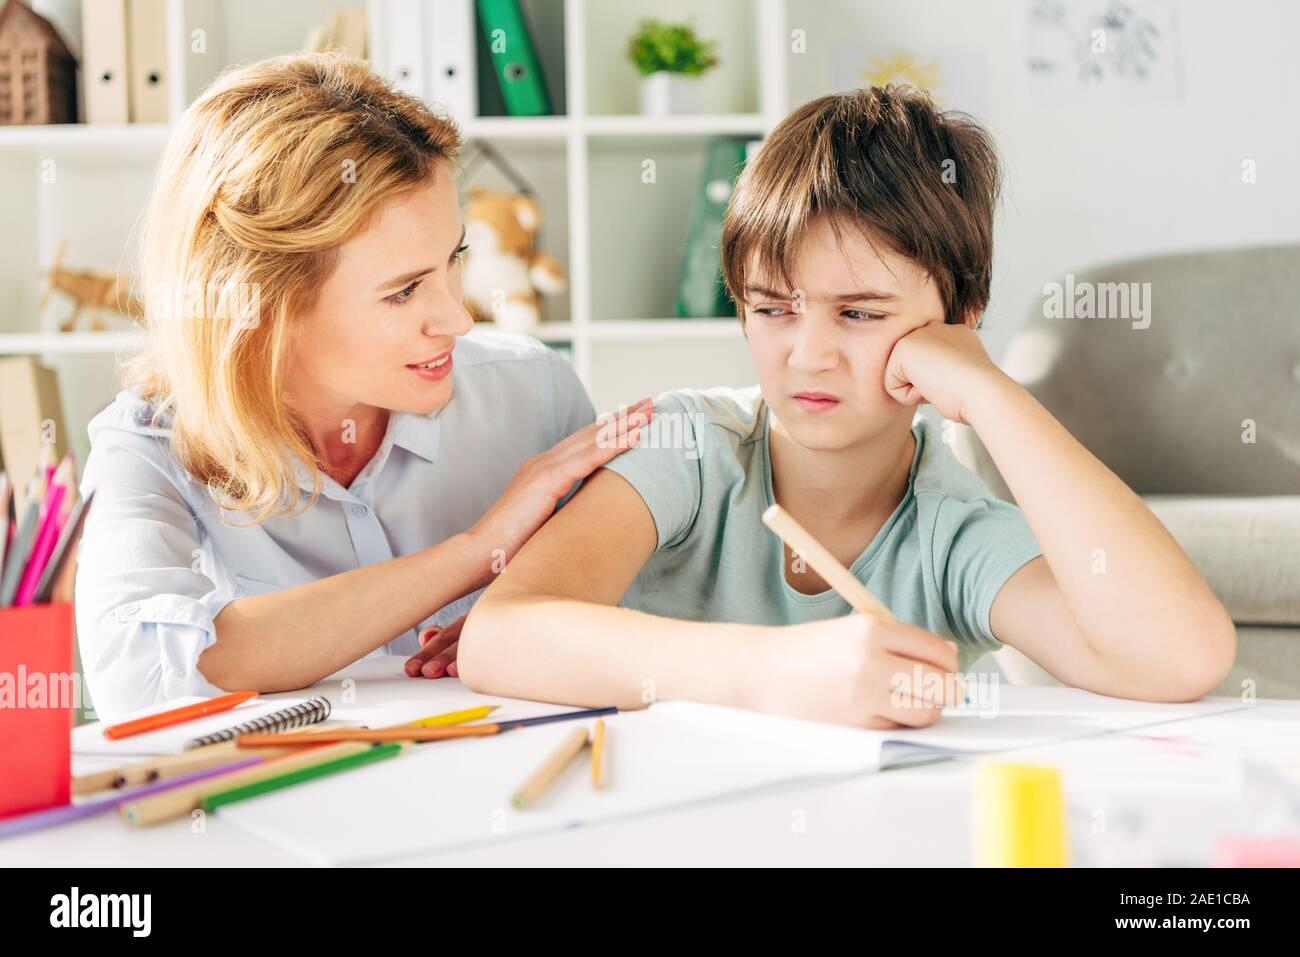 sad kid with dyslexia holding pencil and smiling child psychologist talking to him Stock Photo